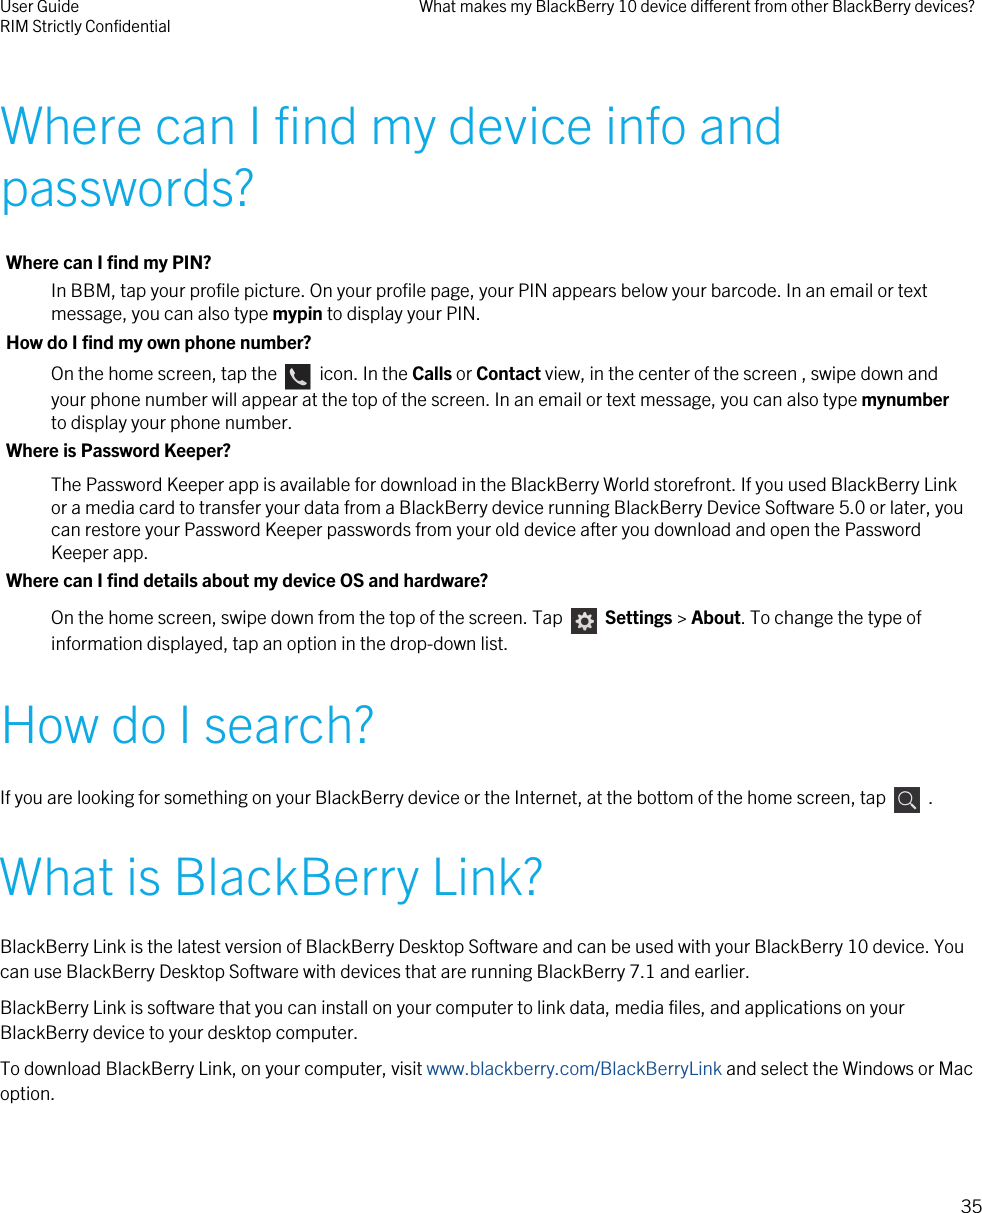 Where can I find my device info andpasswords?Where can I find my PIN?In BBM, tap your profile picture. On your profile page, your PIN appears below your barcode. In an email or textmessage, you can also type mypin to display your PIN.How do I find my own phone number?On the home screen, tap the    icon. In the Calls or Contact view, in the center of the screen , swipe down andyour phone number will appear at the top of the screen. In an email or text message, you can also type mynumberto display your phone number.Where is Password Keeper?The Password Keeper app is available for download in the BlackBerry World storefront. If you used BlackBerry Linkor a media card to transfer your data from a BlackBerry device running BlackBerry Device Software 5.0 or later, youcan restore your Password Keeper passwords from your old device after you download and open the PasswordKeeper app.Where can I find details about my device OS and hardware?On the home screen, swipe down from the top of the screen. Tap    Settings &gt; About. To change the type ofinformation displayed, tap an option in the drop-down list.How do I search?If you are looking for something on your BlackBerry device or the Internet, at the bottom of the home screen, tap    .What is BlackBerry Link?BlackBerry Link is the latest version of BlackBerry Desktop Software and can be used with your BlackBerry 10 device. Youcan use BlackBerry Desktop Software with devices that are running BlackBerry 7.1 and earlier.BlackBerry Link is software that you can install on your computer to link data, media files, and applications on yourBlackBerry device to your desktop computer.To download BlackBerry Link, on your computer, visit www.blackberry.com/BlackBerryLink and select the Windows or Macoption.User GuideRIM Strictly Confidential What makes my BlackBerry 10 device different from other BlackBerry devices?35